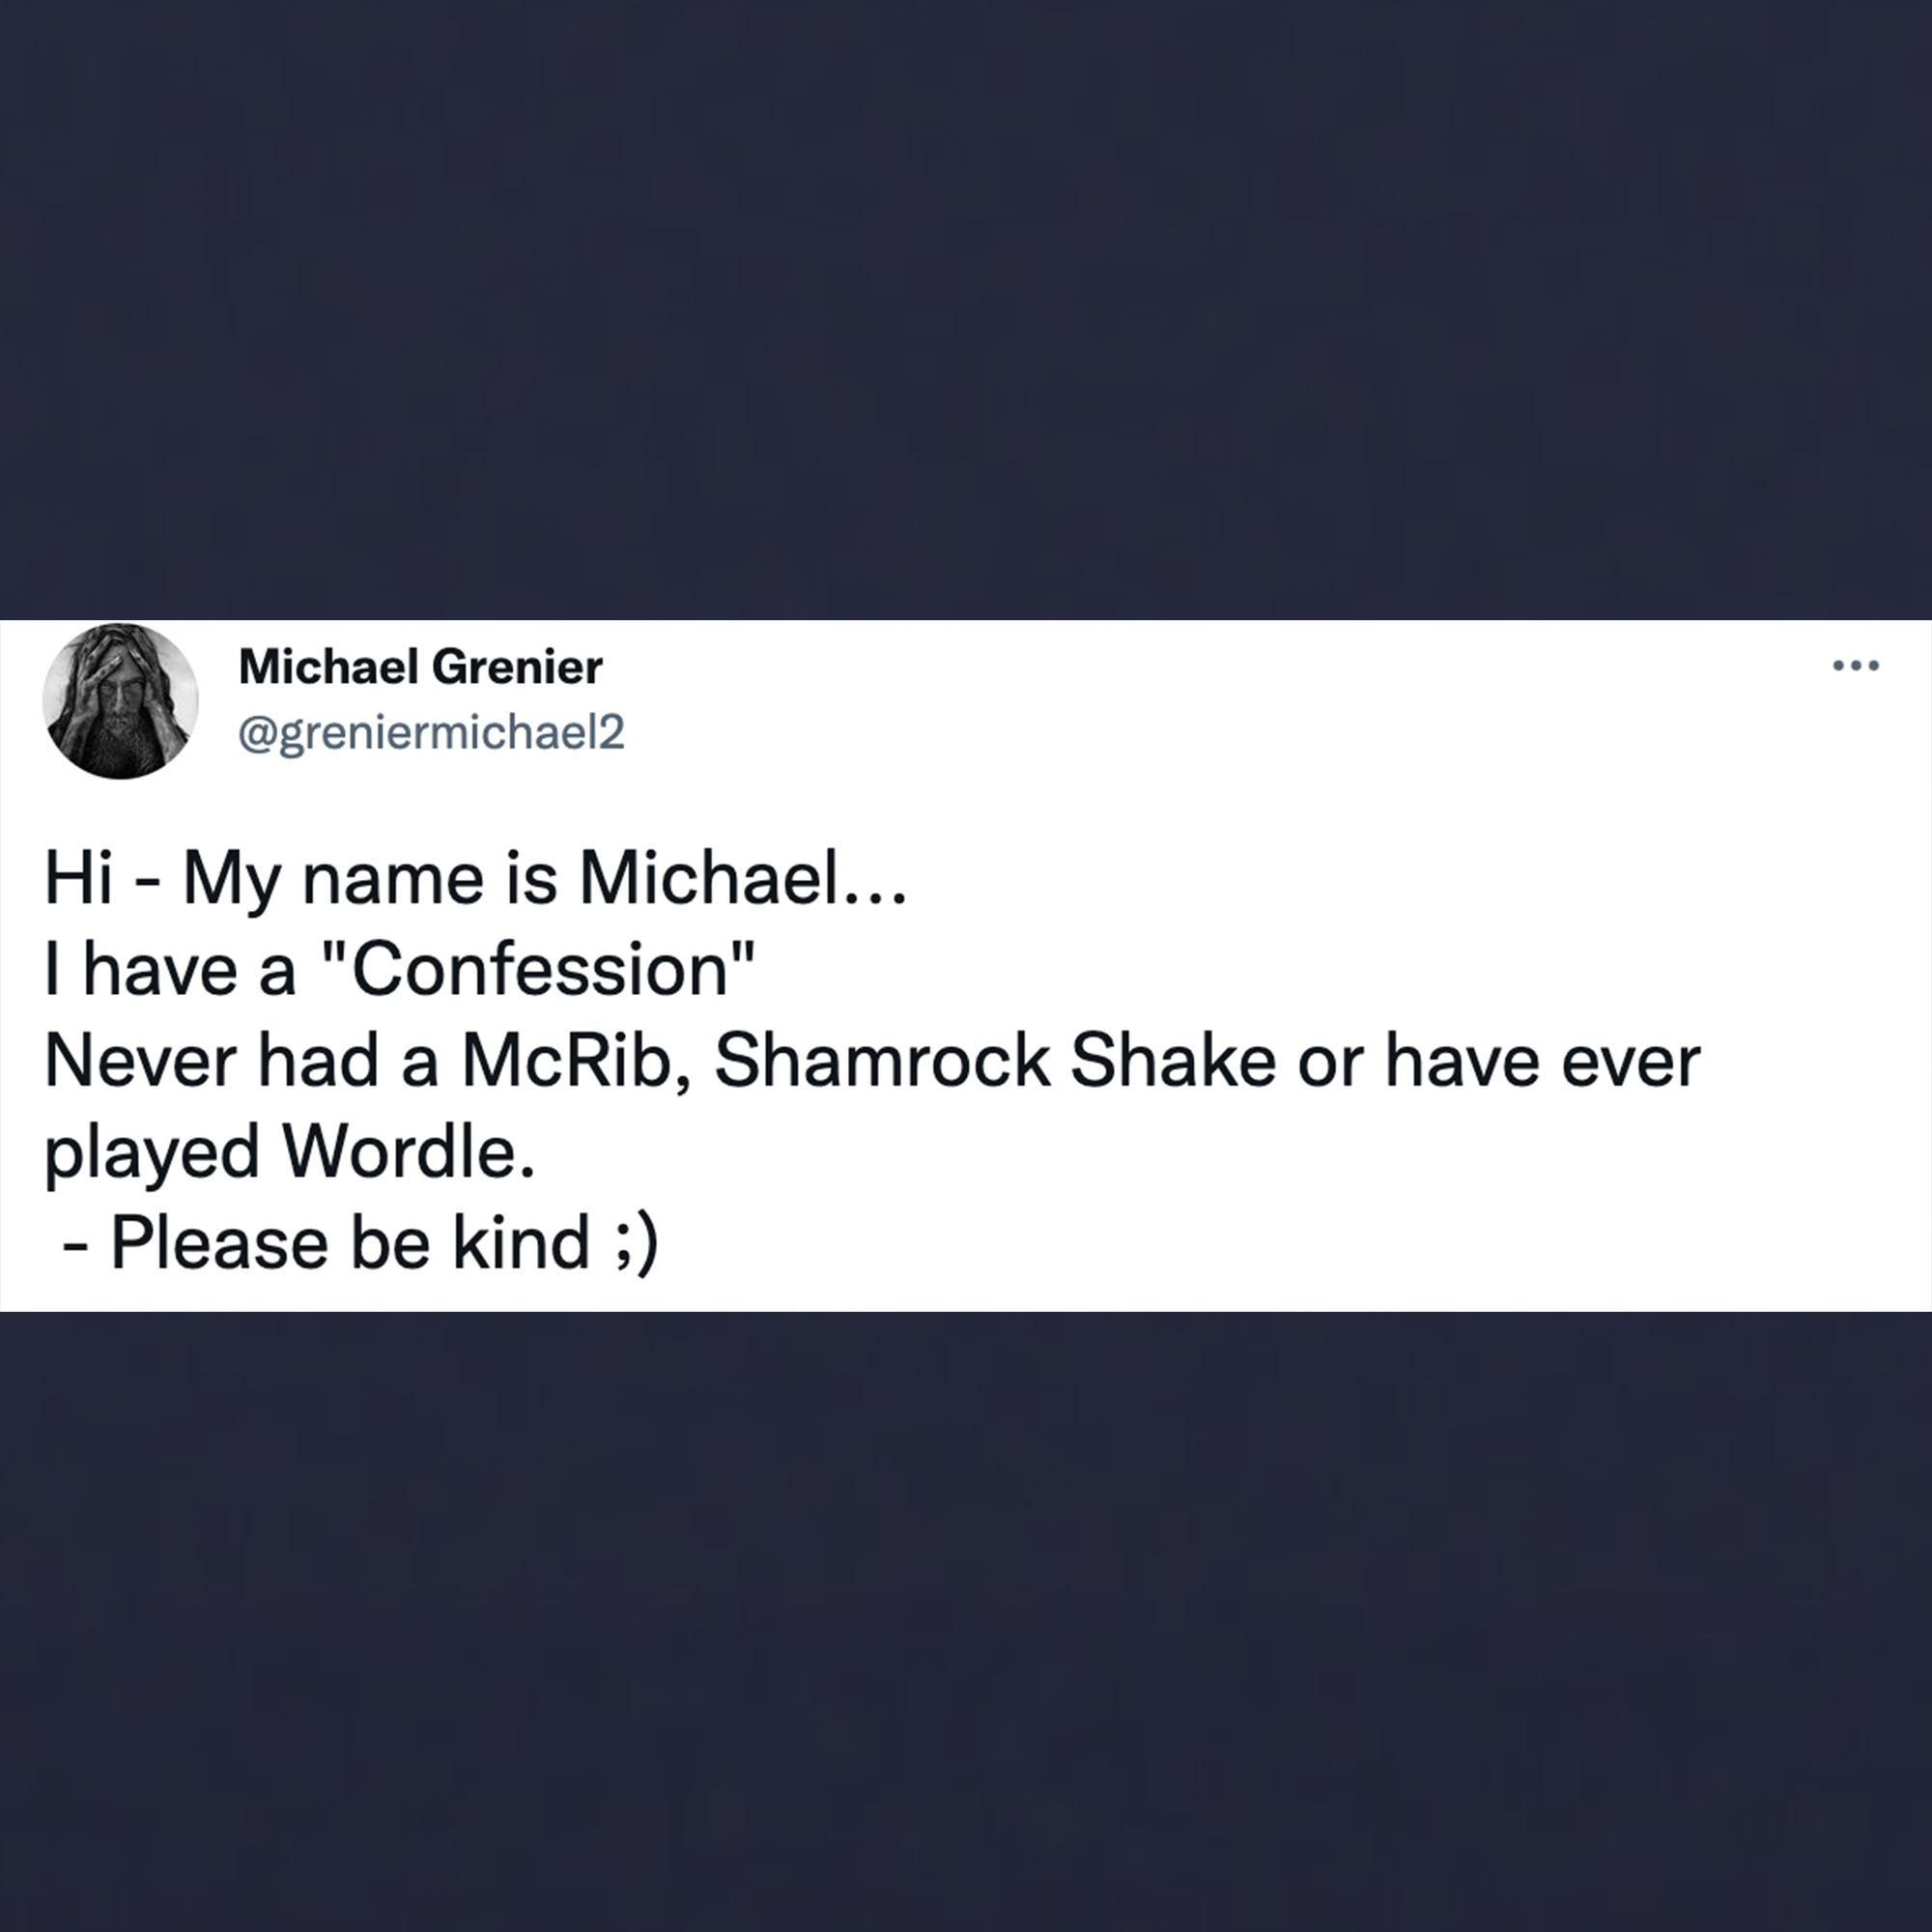 funny tweets - website - . Michael Grenier Hi My name is Michael... I have a "Confession" Never had a McRib, Shamrock Shake or have ever played Wordle. Please be kind ;